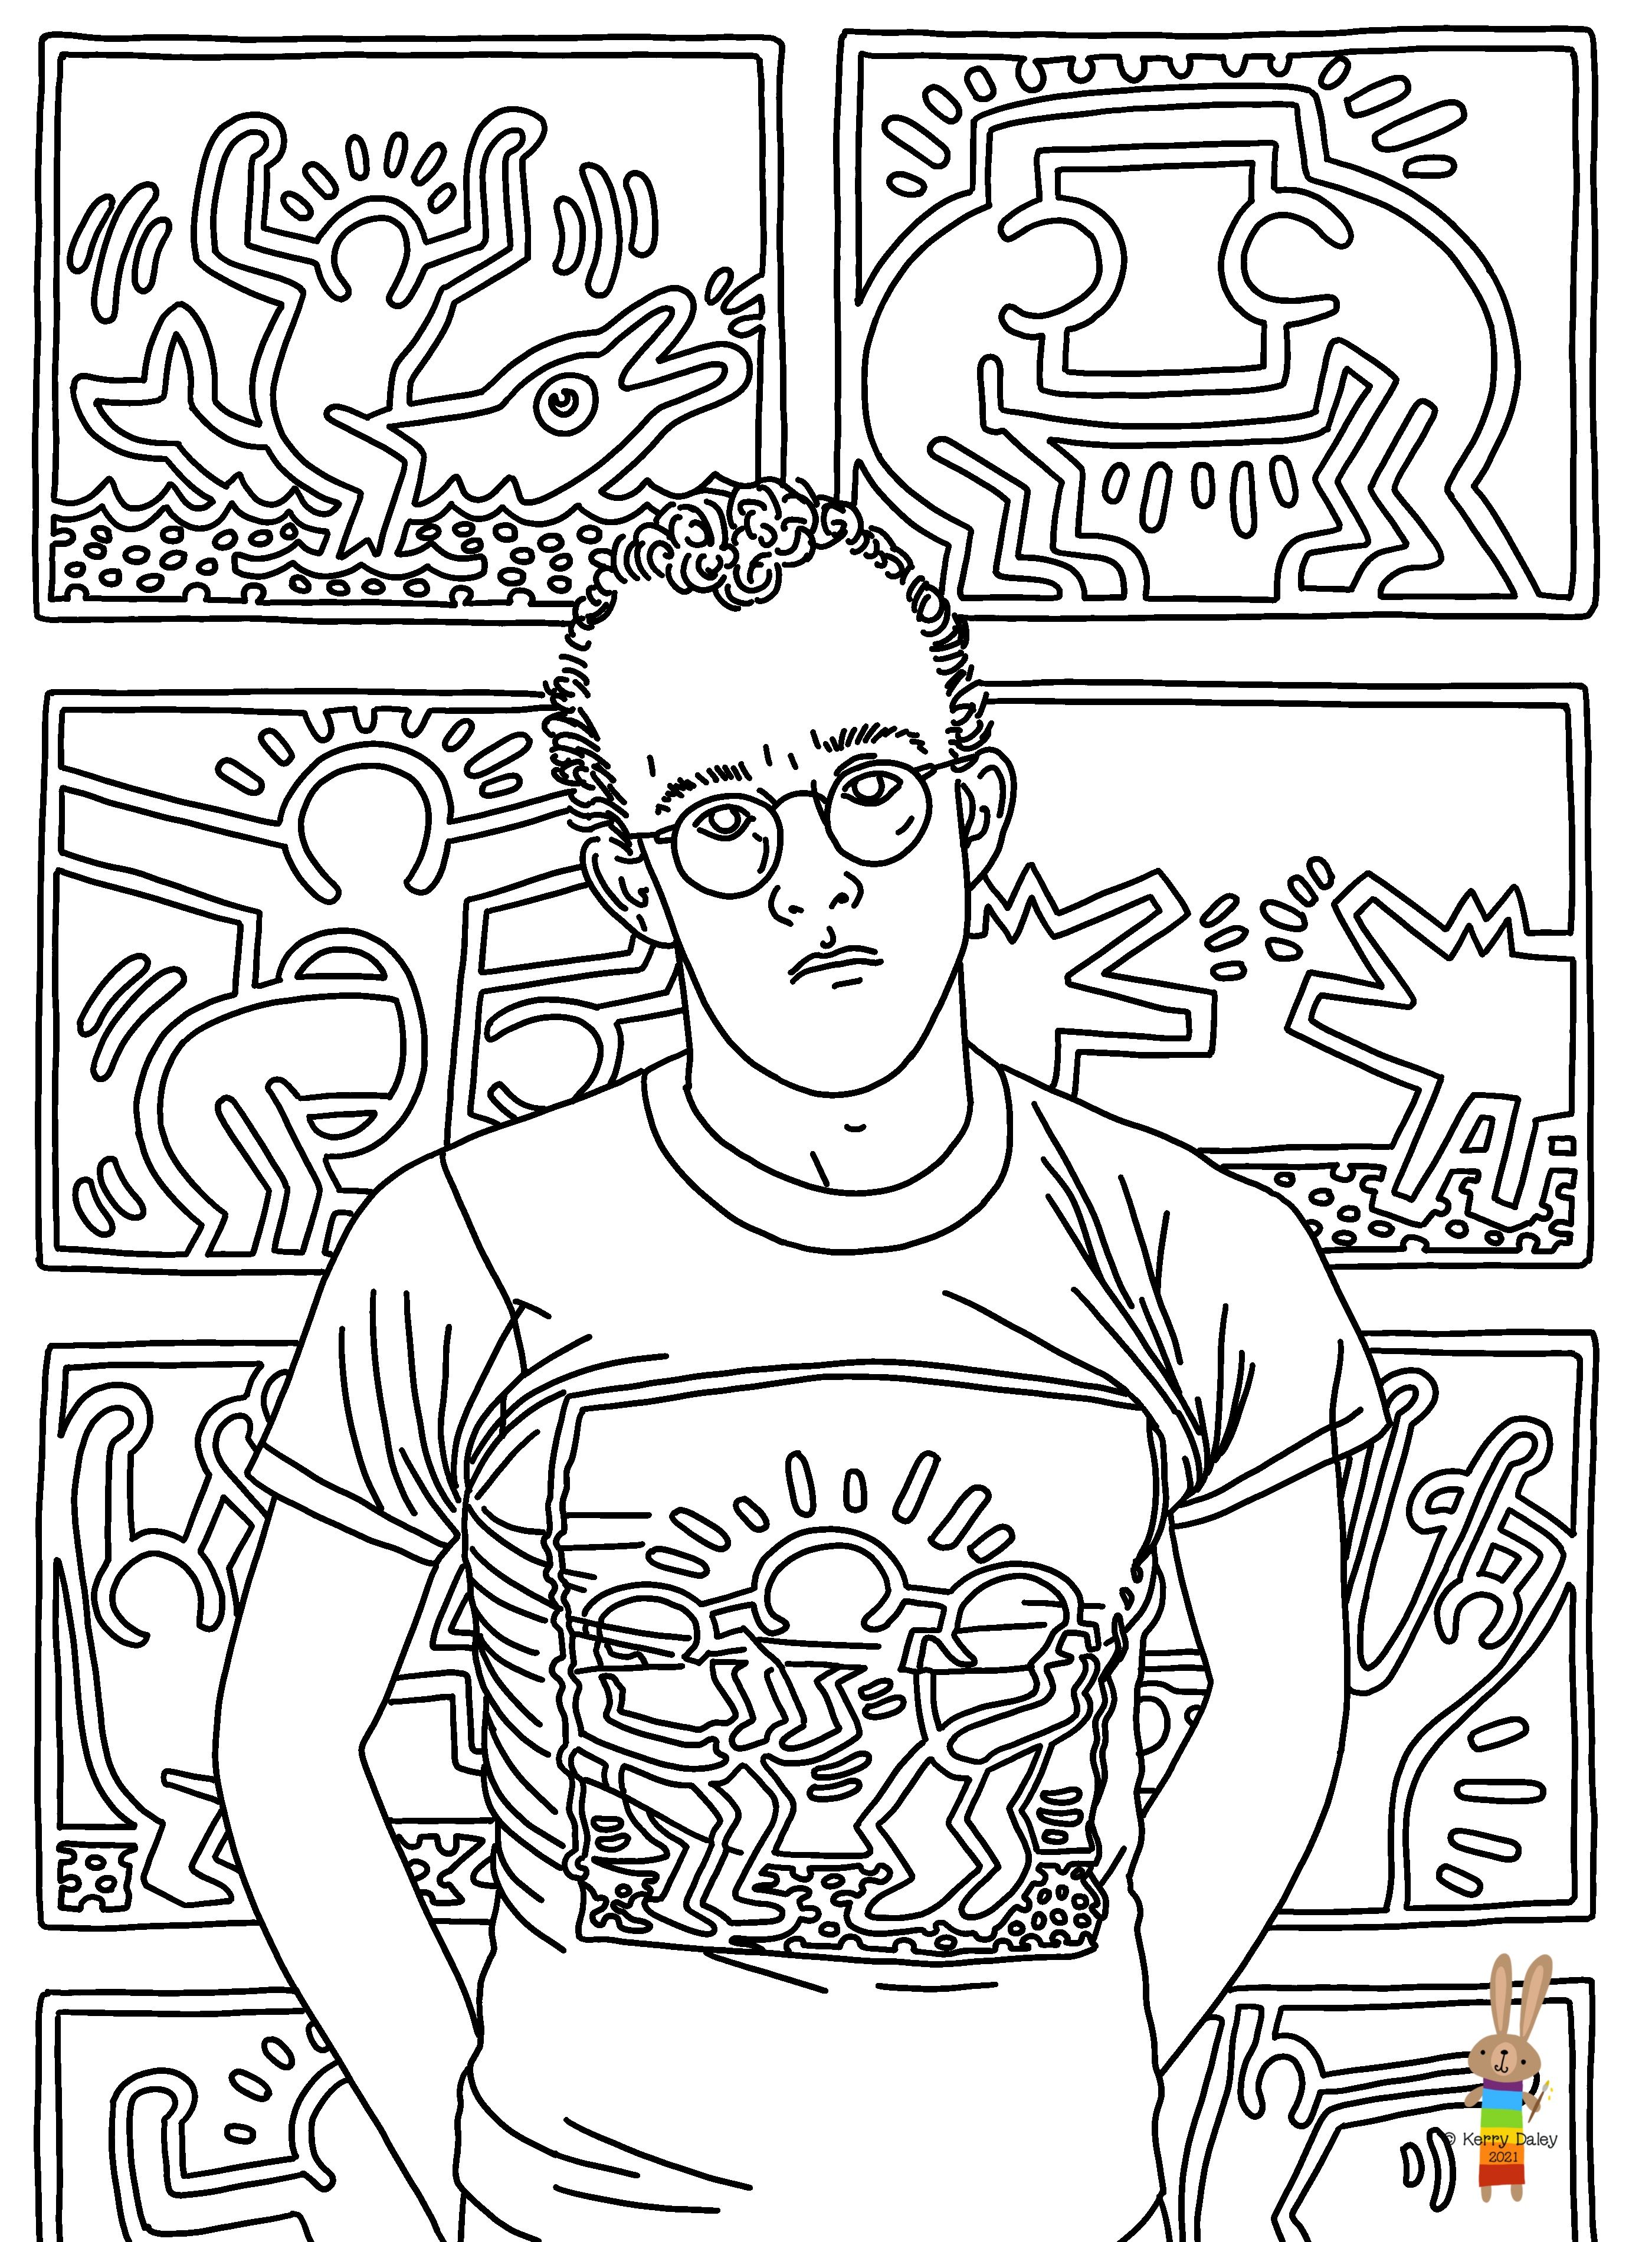 Keith haring coloring page color the great artists keith haring art haring art art history lessons